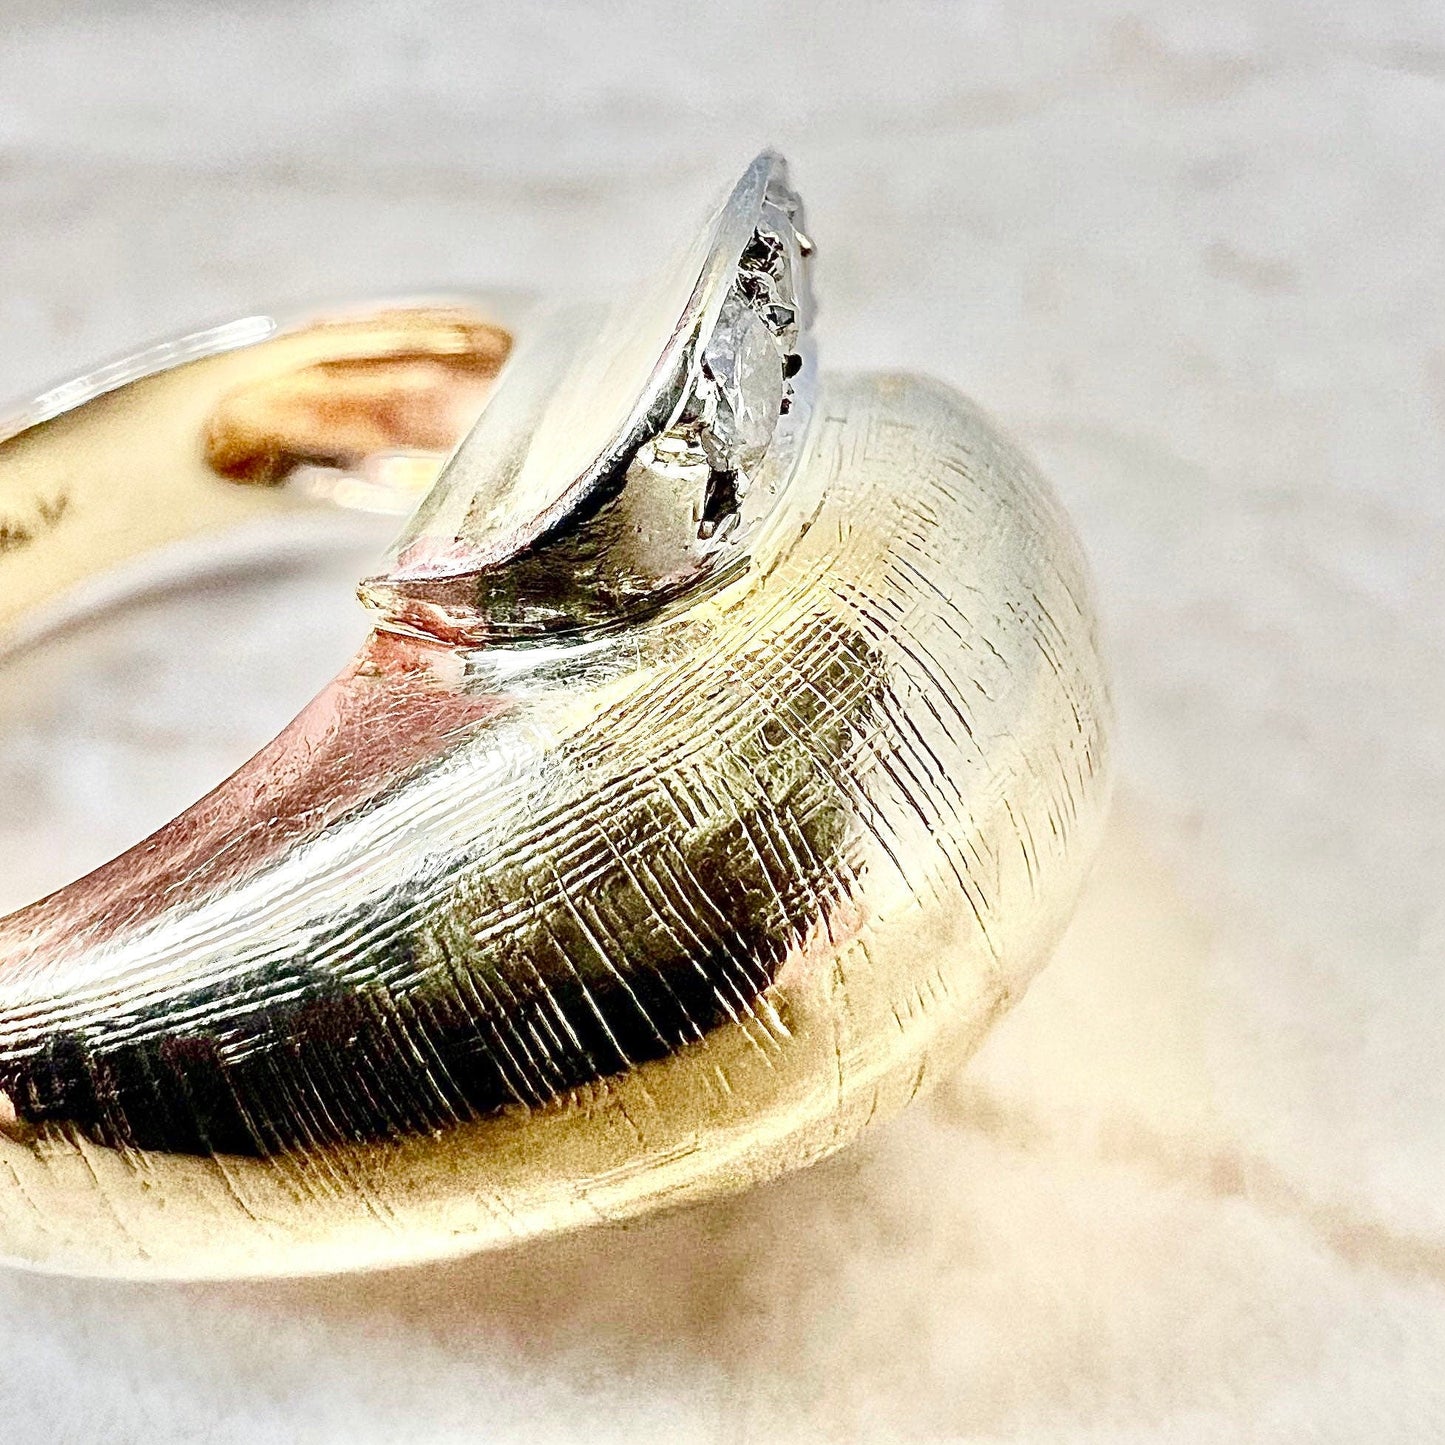 Vintage 14K Diamond Dome Ring 0.45 CTTW - Chunky Yellow Gold Diamond Cocktail Ring - Birthday Gift - Best Gift For Her - Anniversary Gift